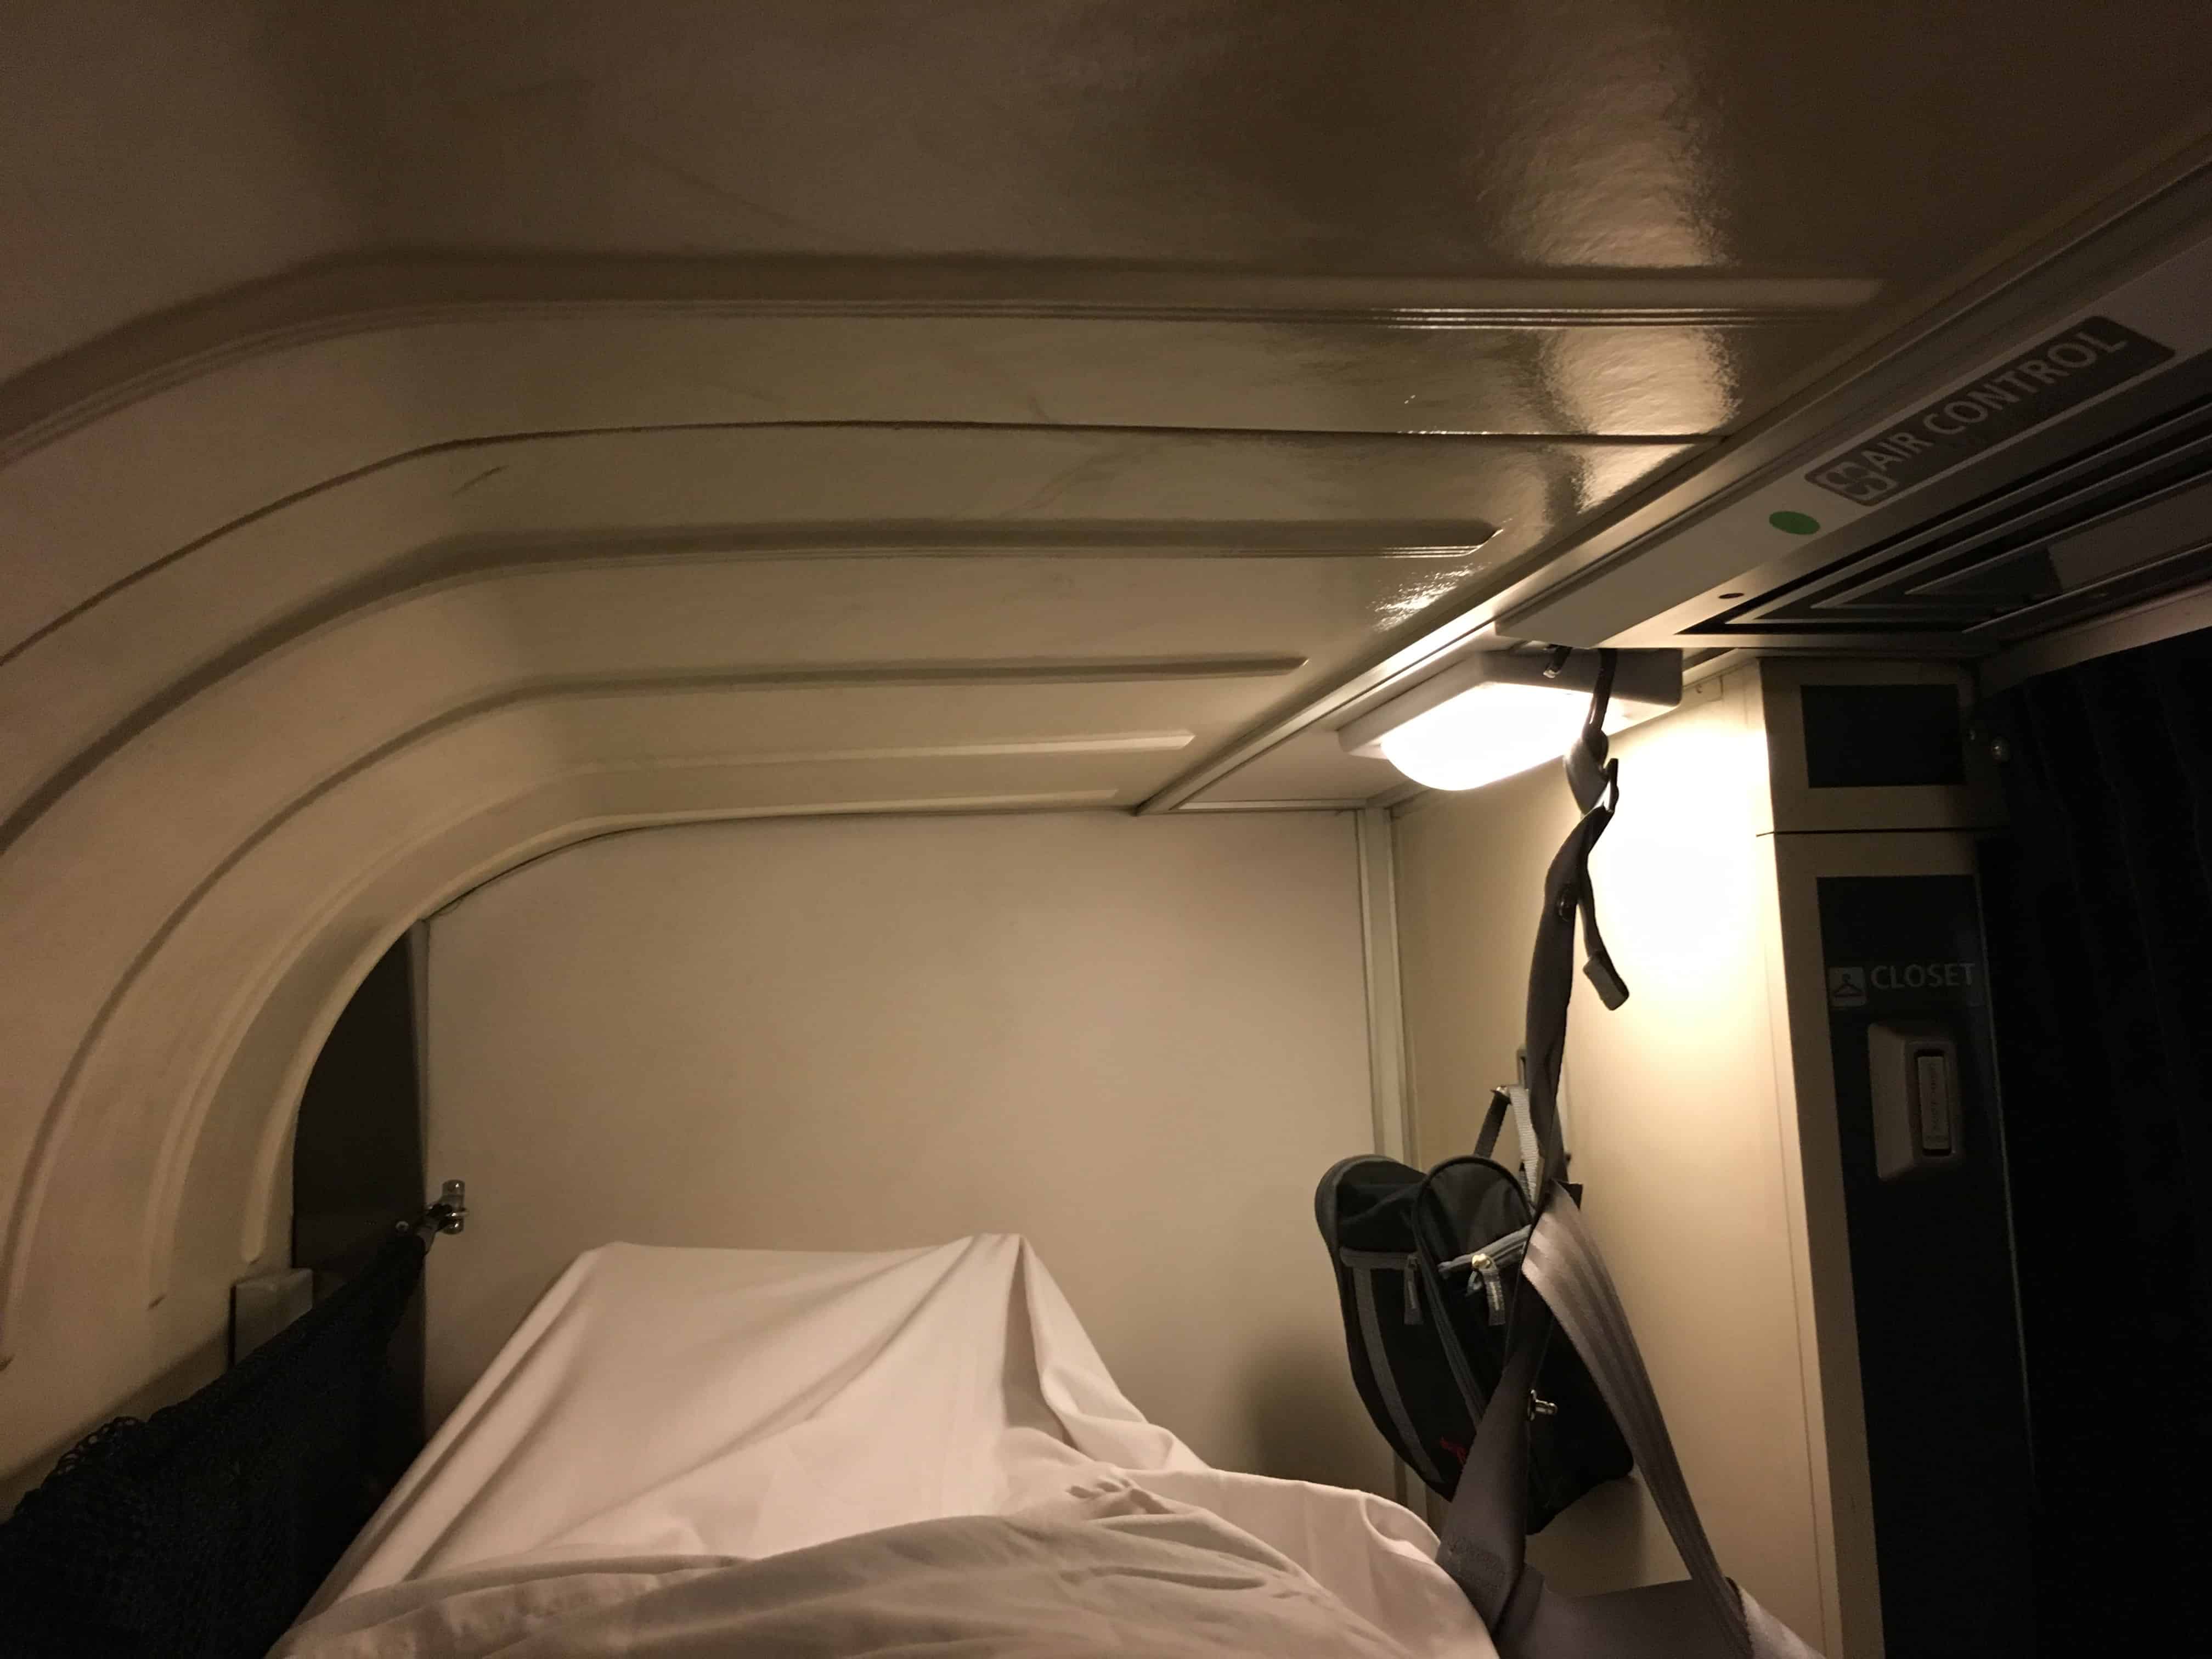 Top bunk on the Amtrak Empire Builder from Seattle to Chicago